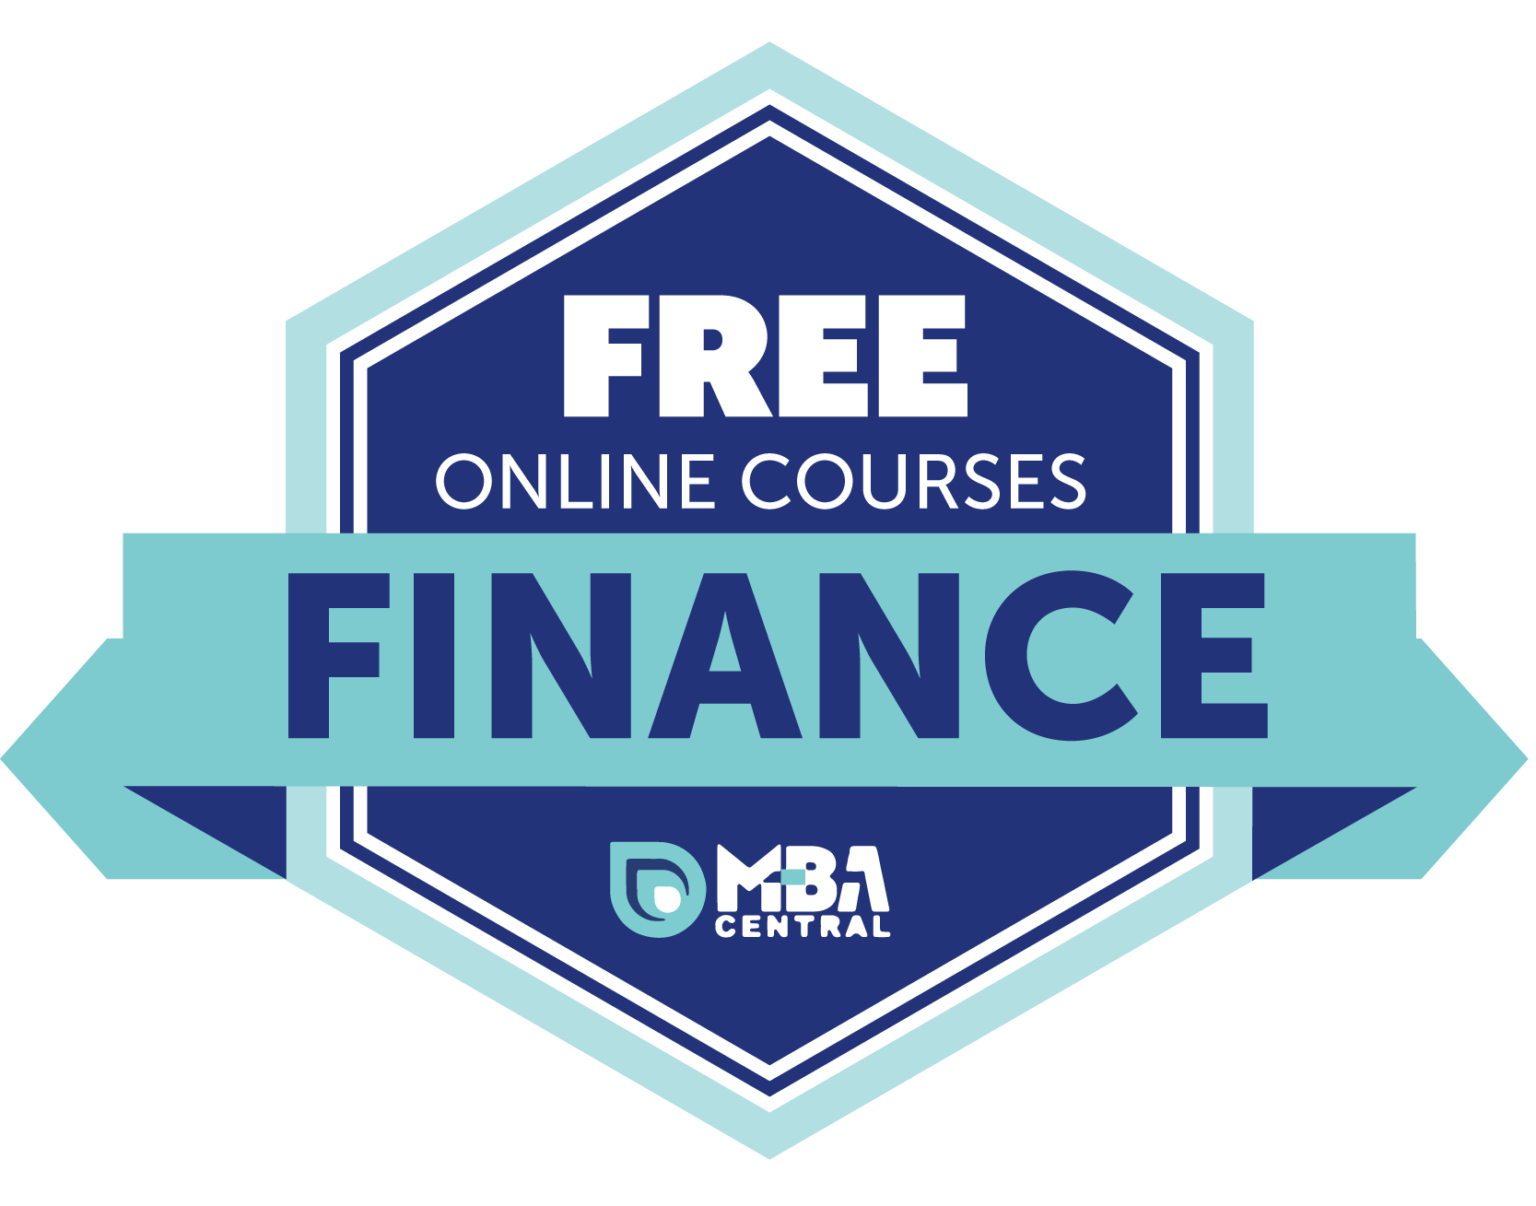 The 15 Best Free Online Finance Courses MBA Central